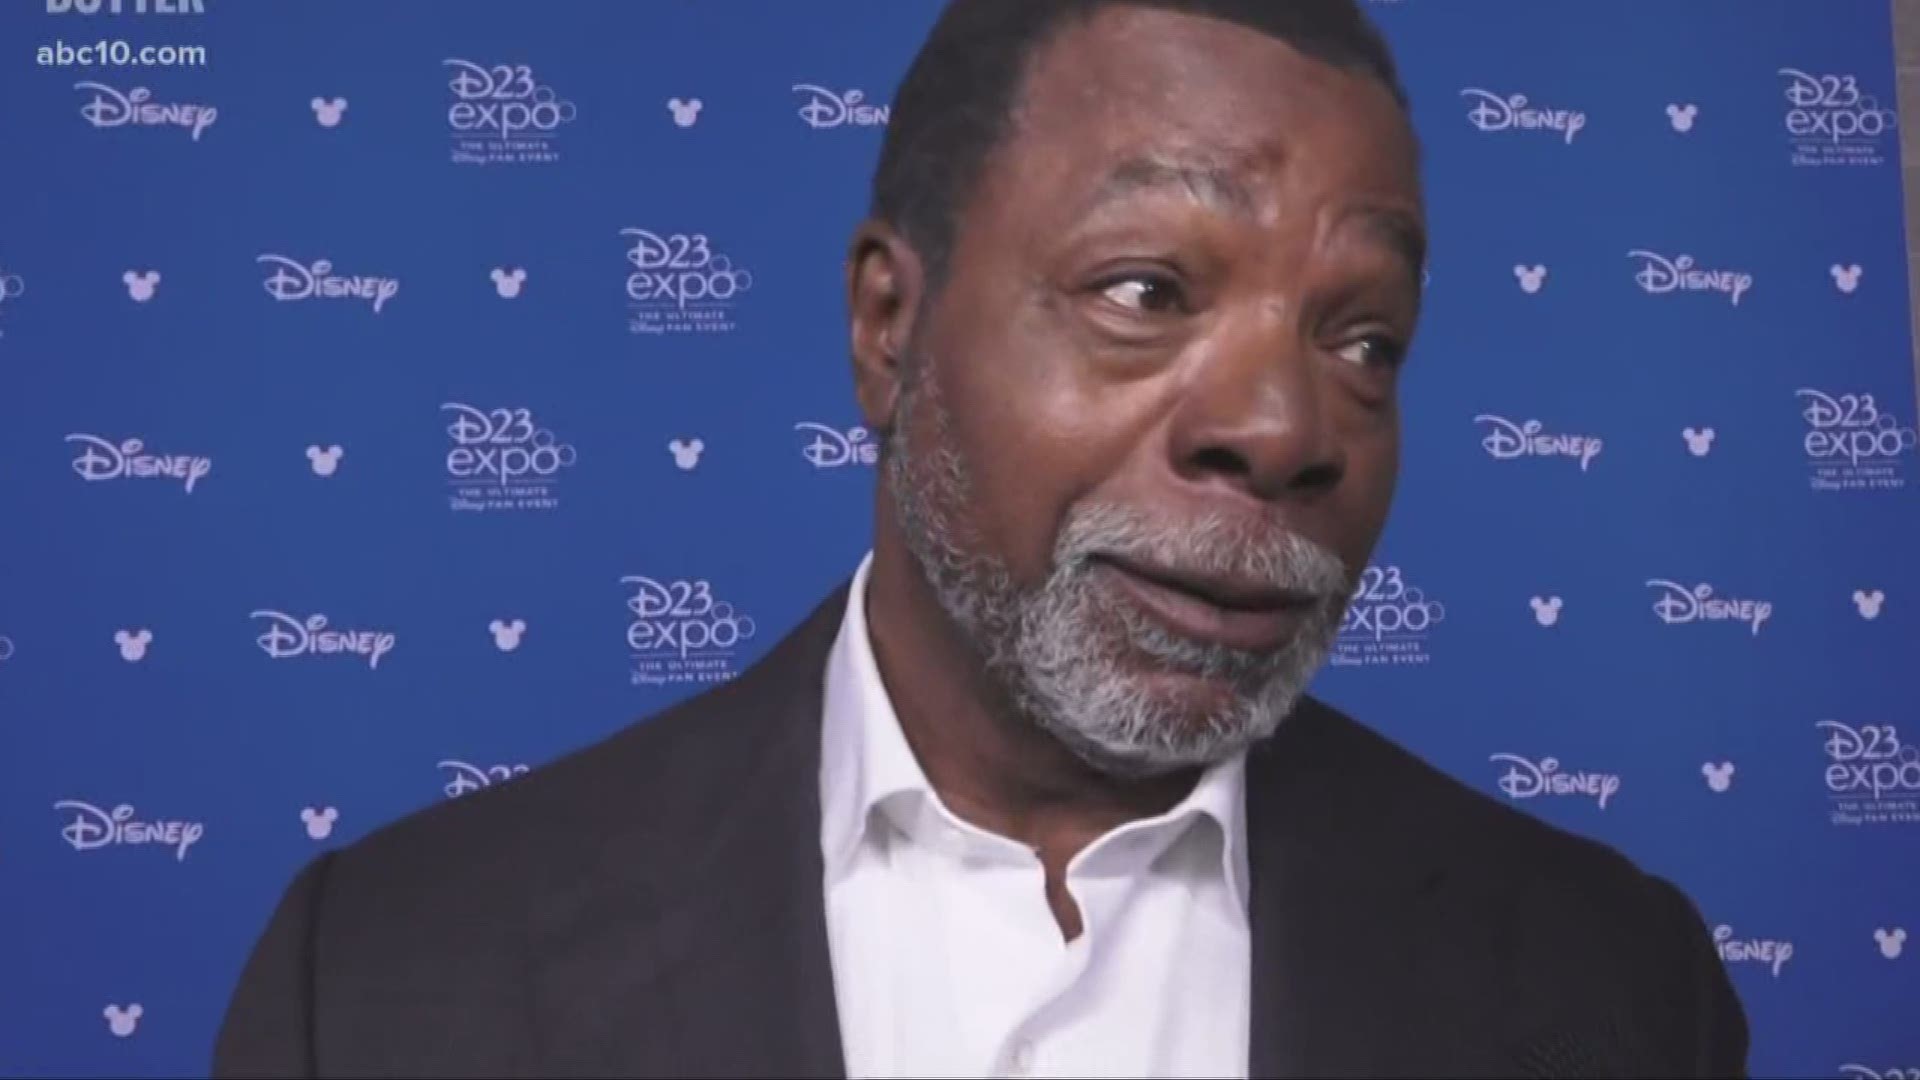 Mark S. Allen talks to Carl Weathers about joining the Star Wars universe.